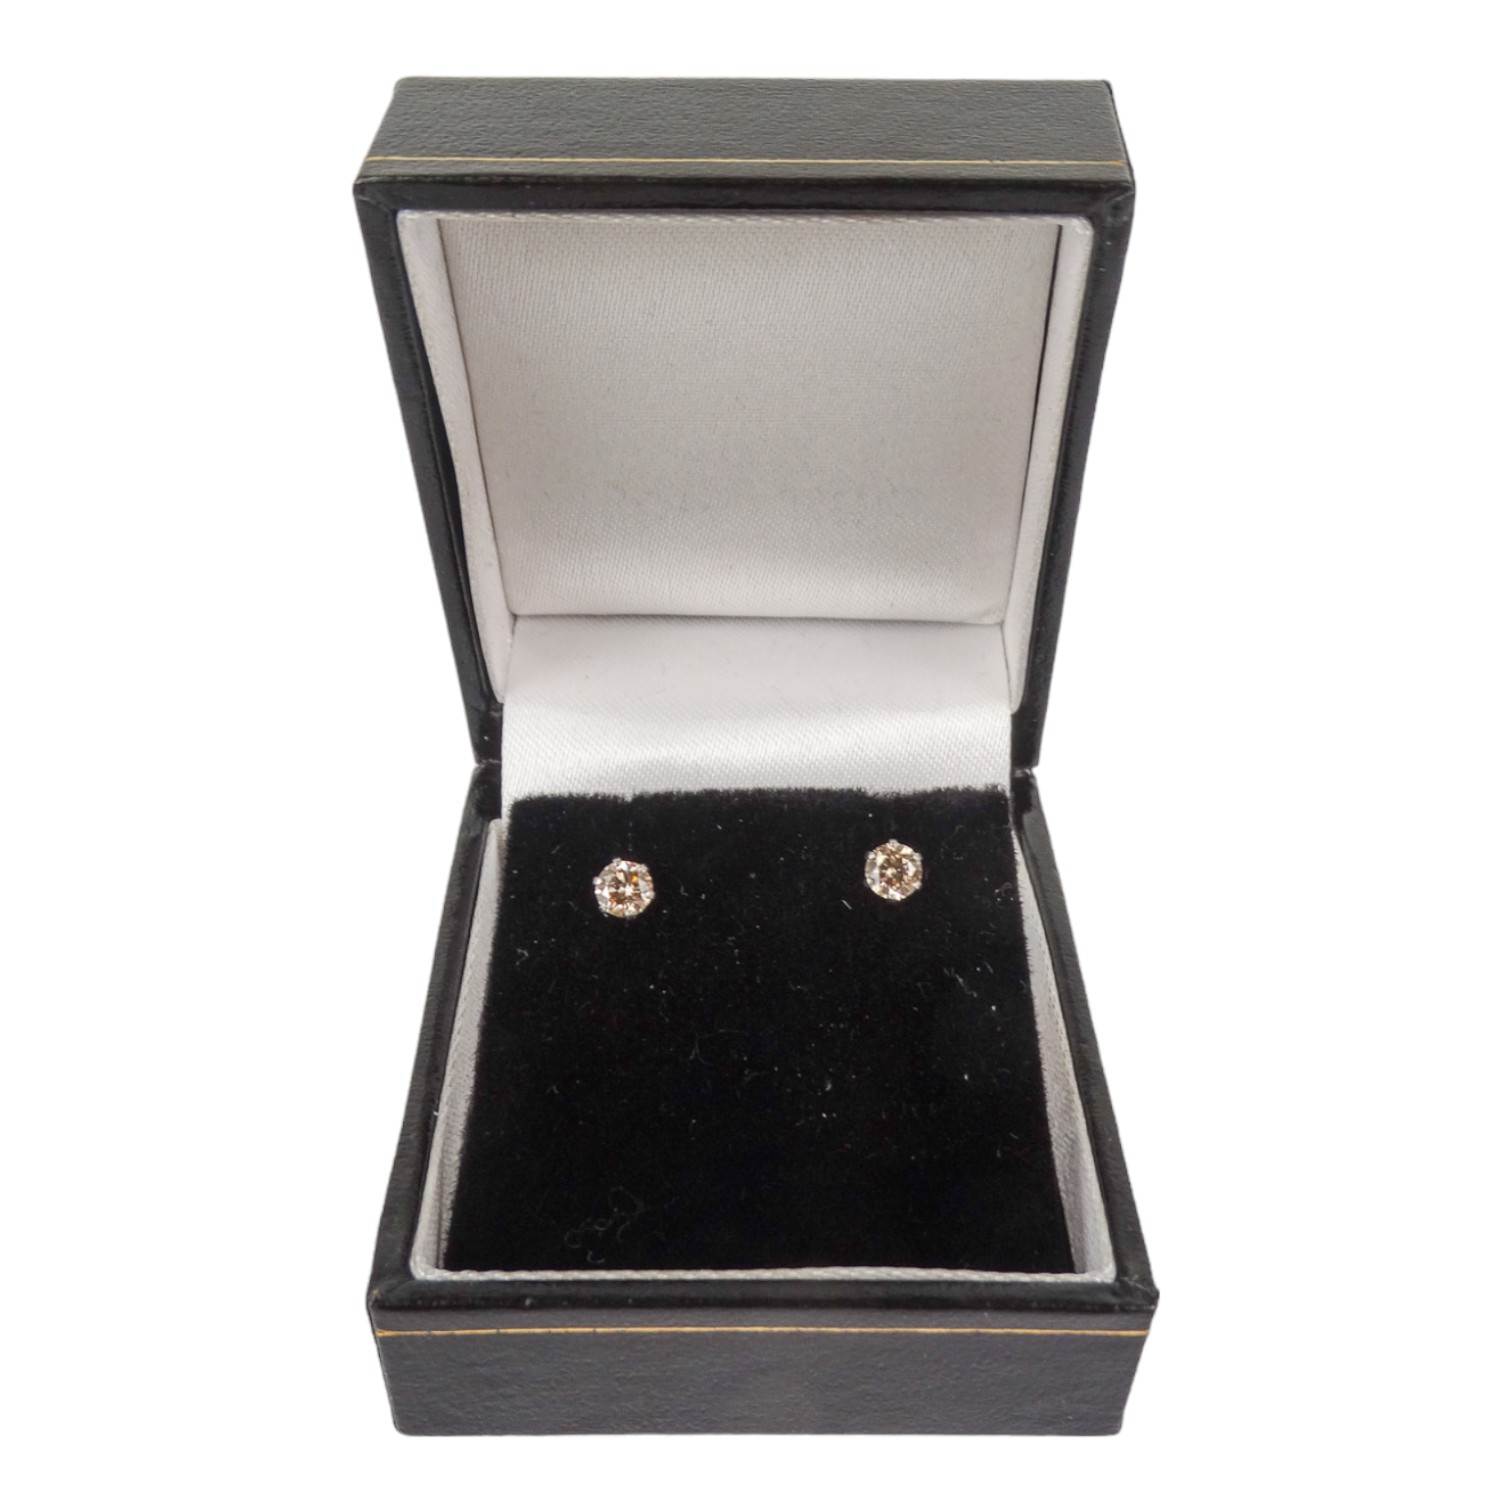 A pair of 18ct white gold diamond solitaire stud earrings - diamond weight 0.40ct approximately, - Image 4 of 4